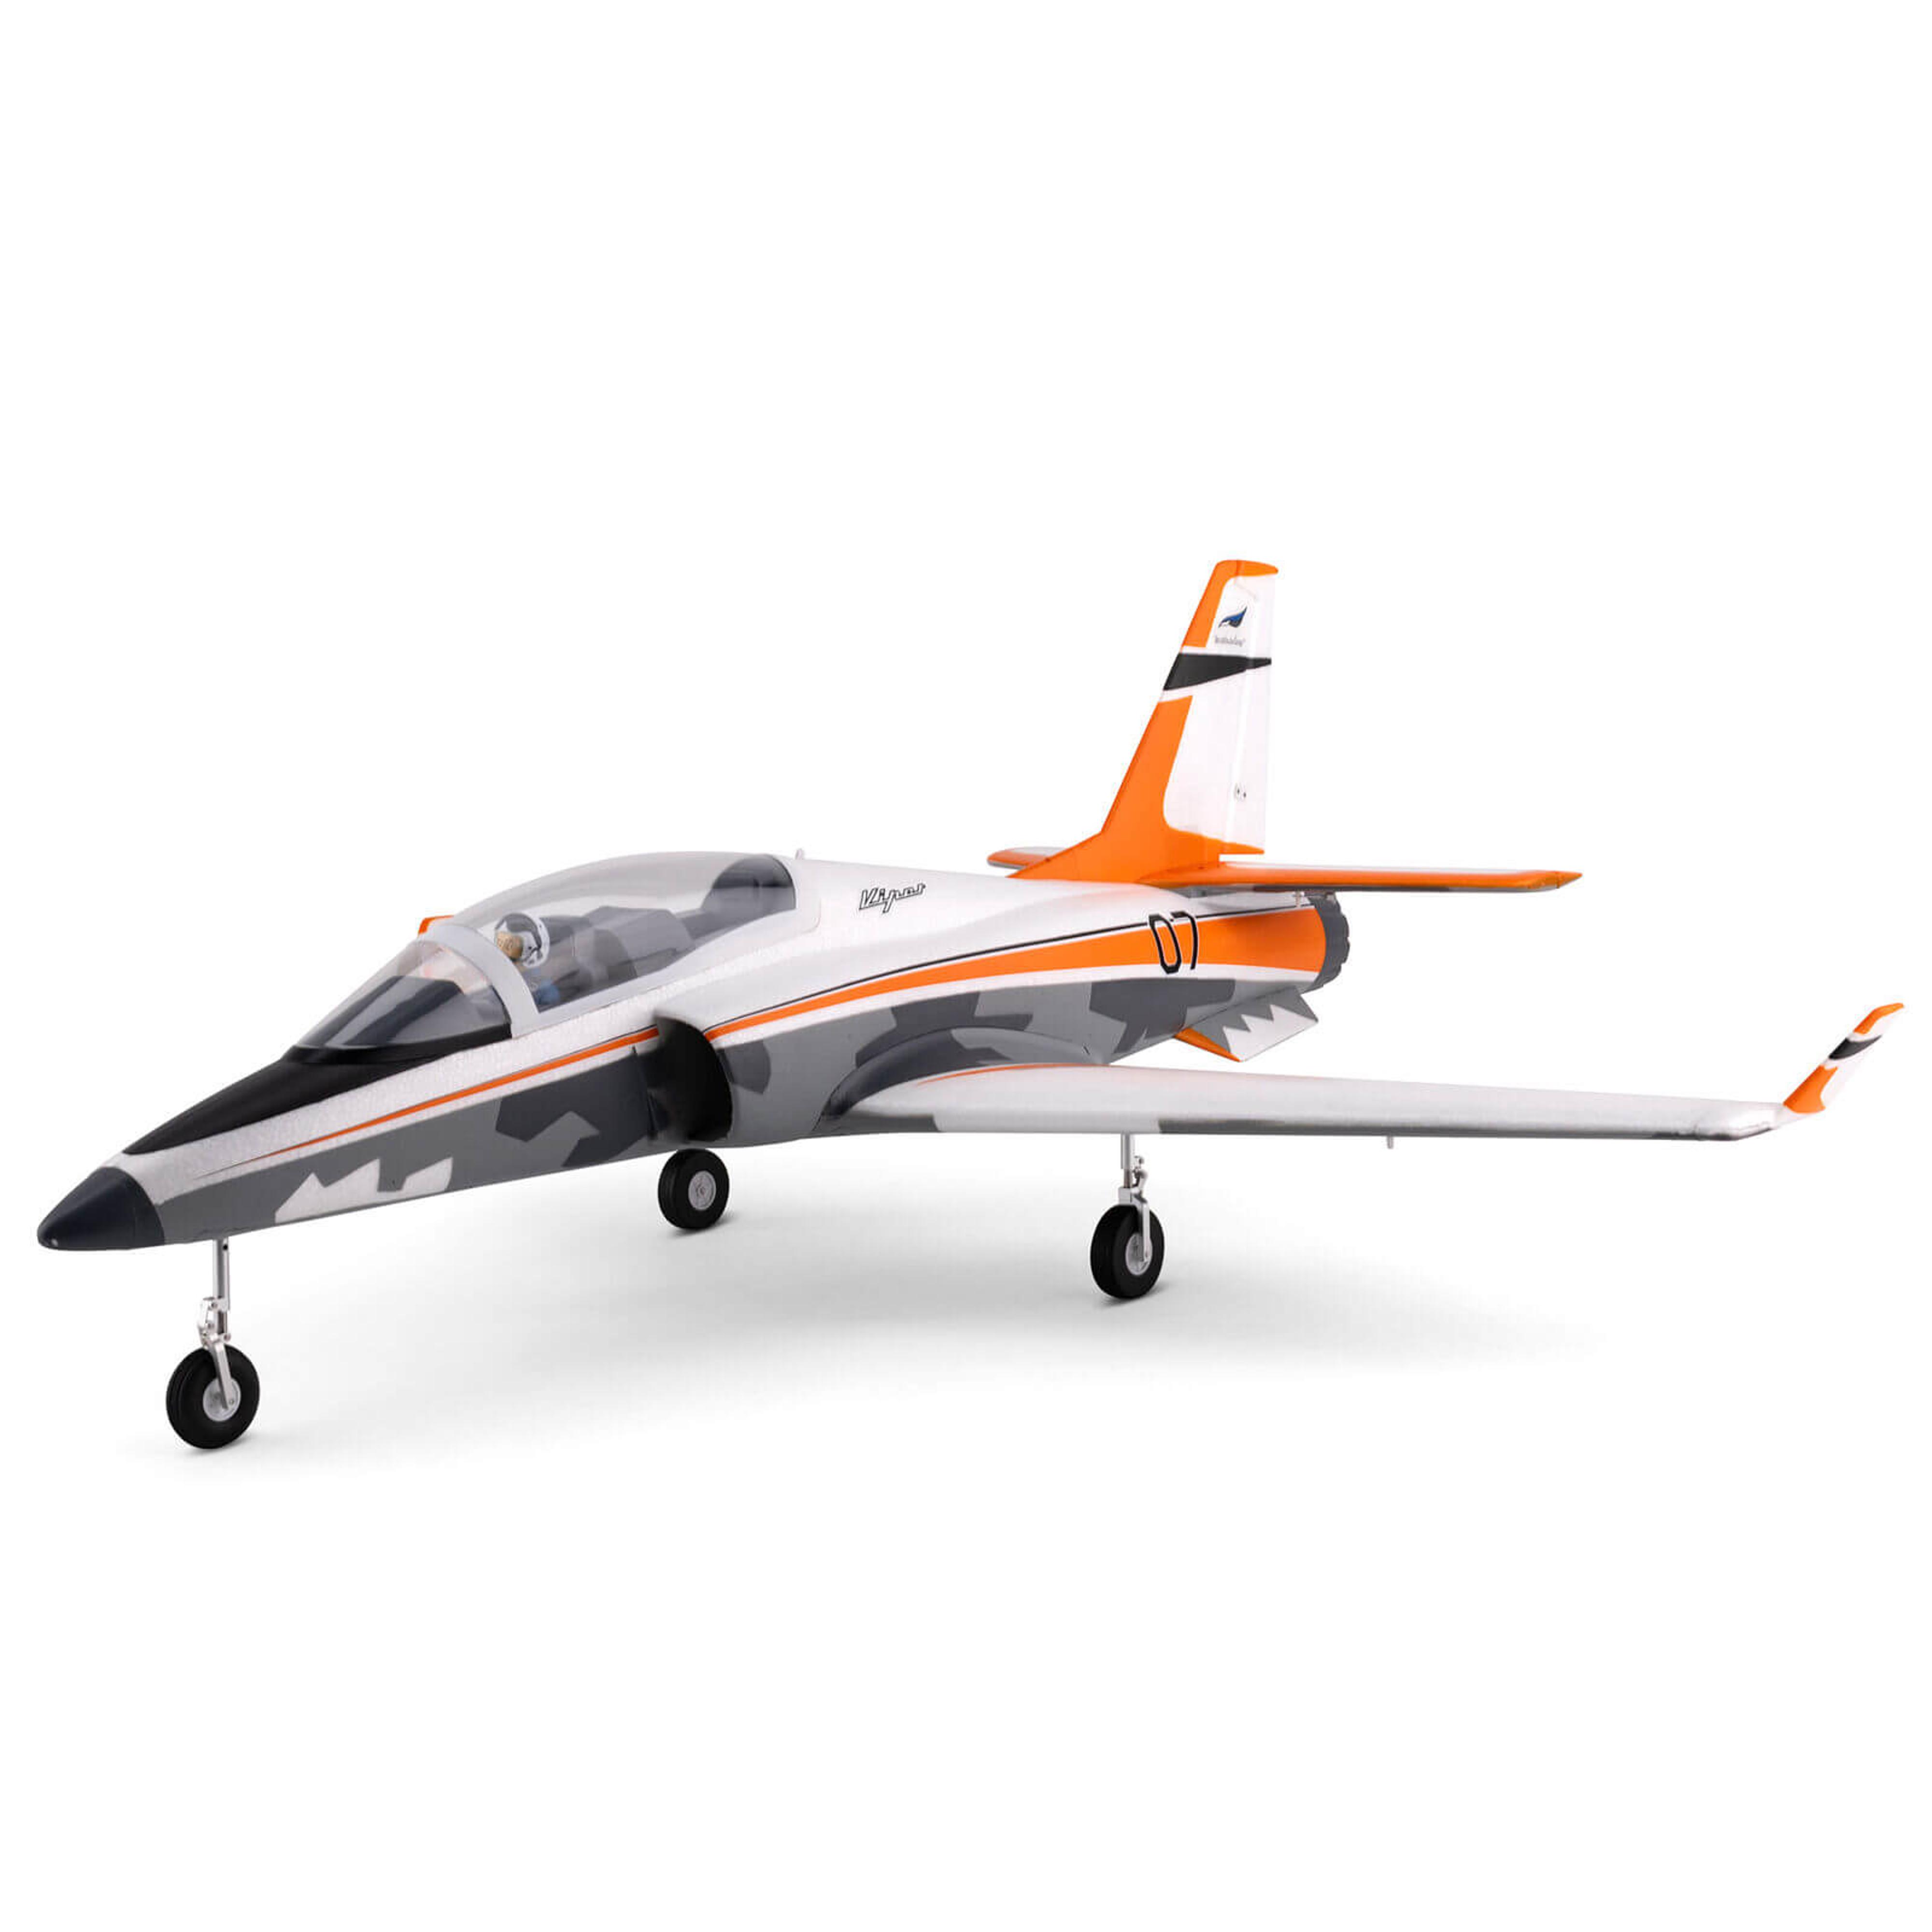 Viper 70mm EDF Jet BNF Basic w/ AS3X, SAFE Select R/C